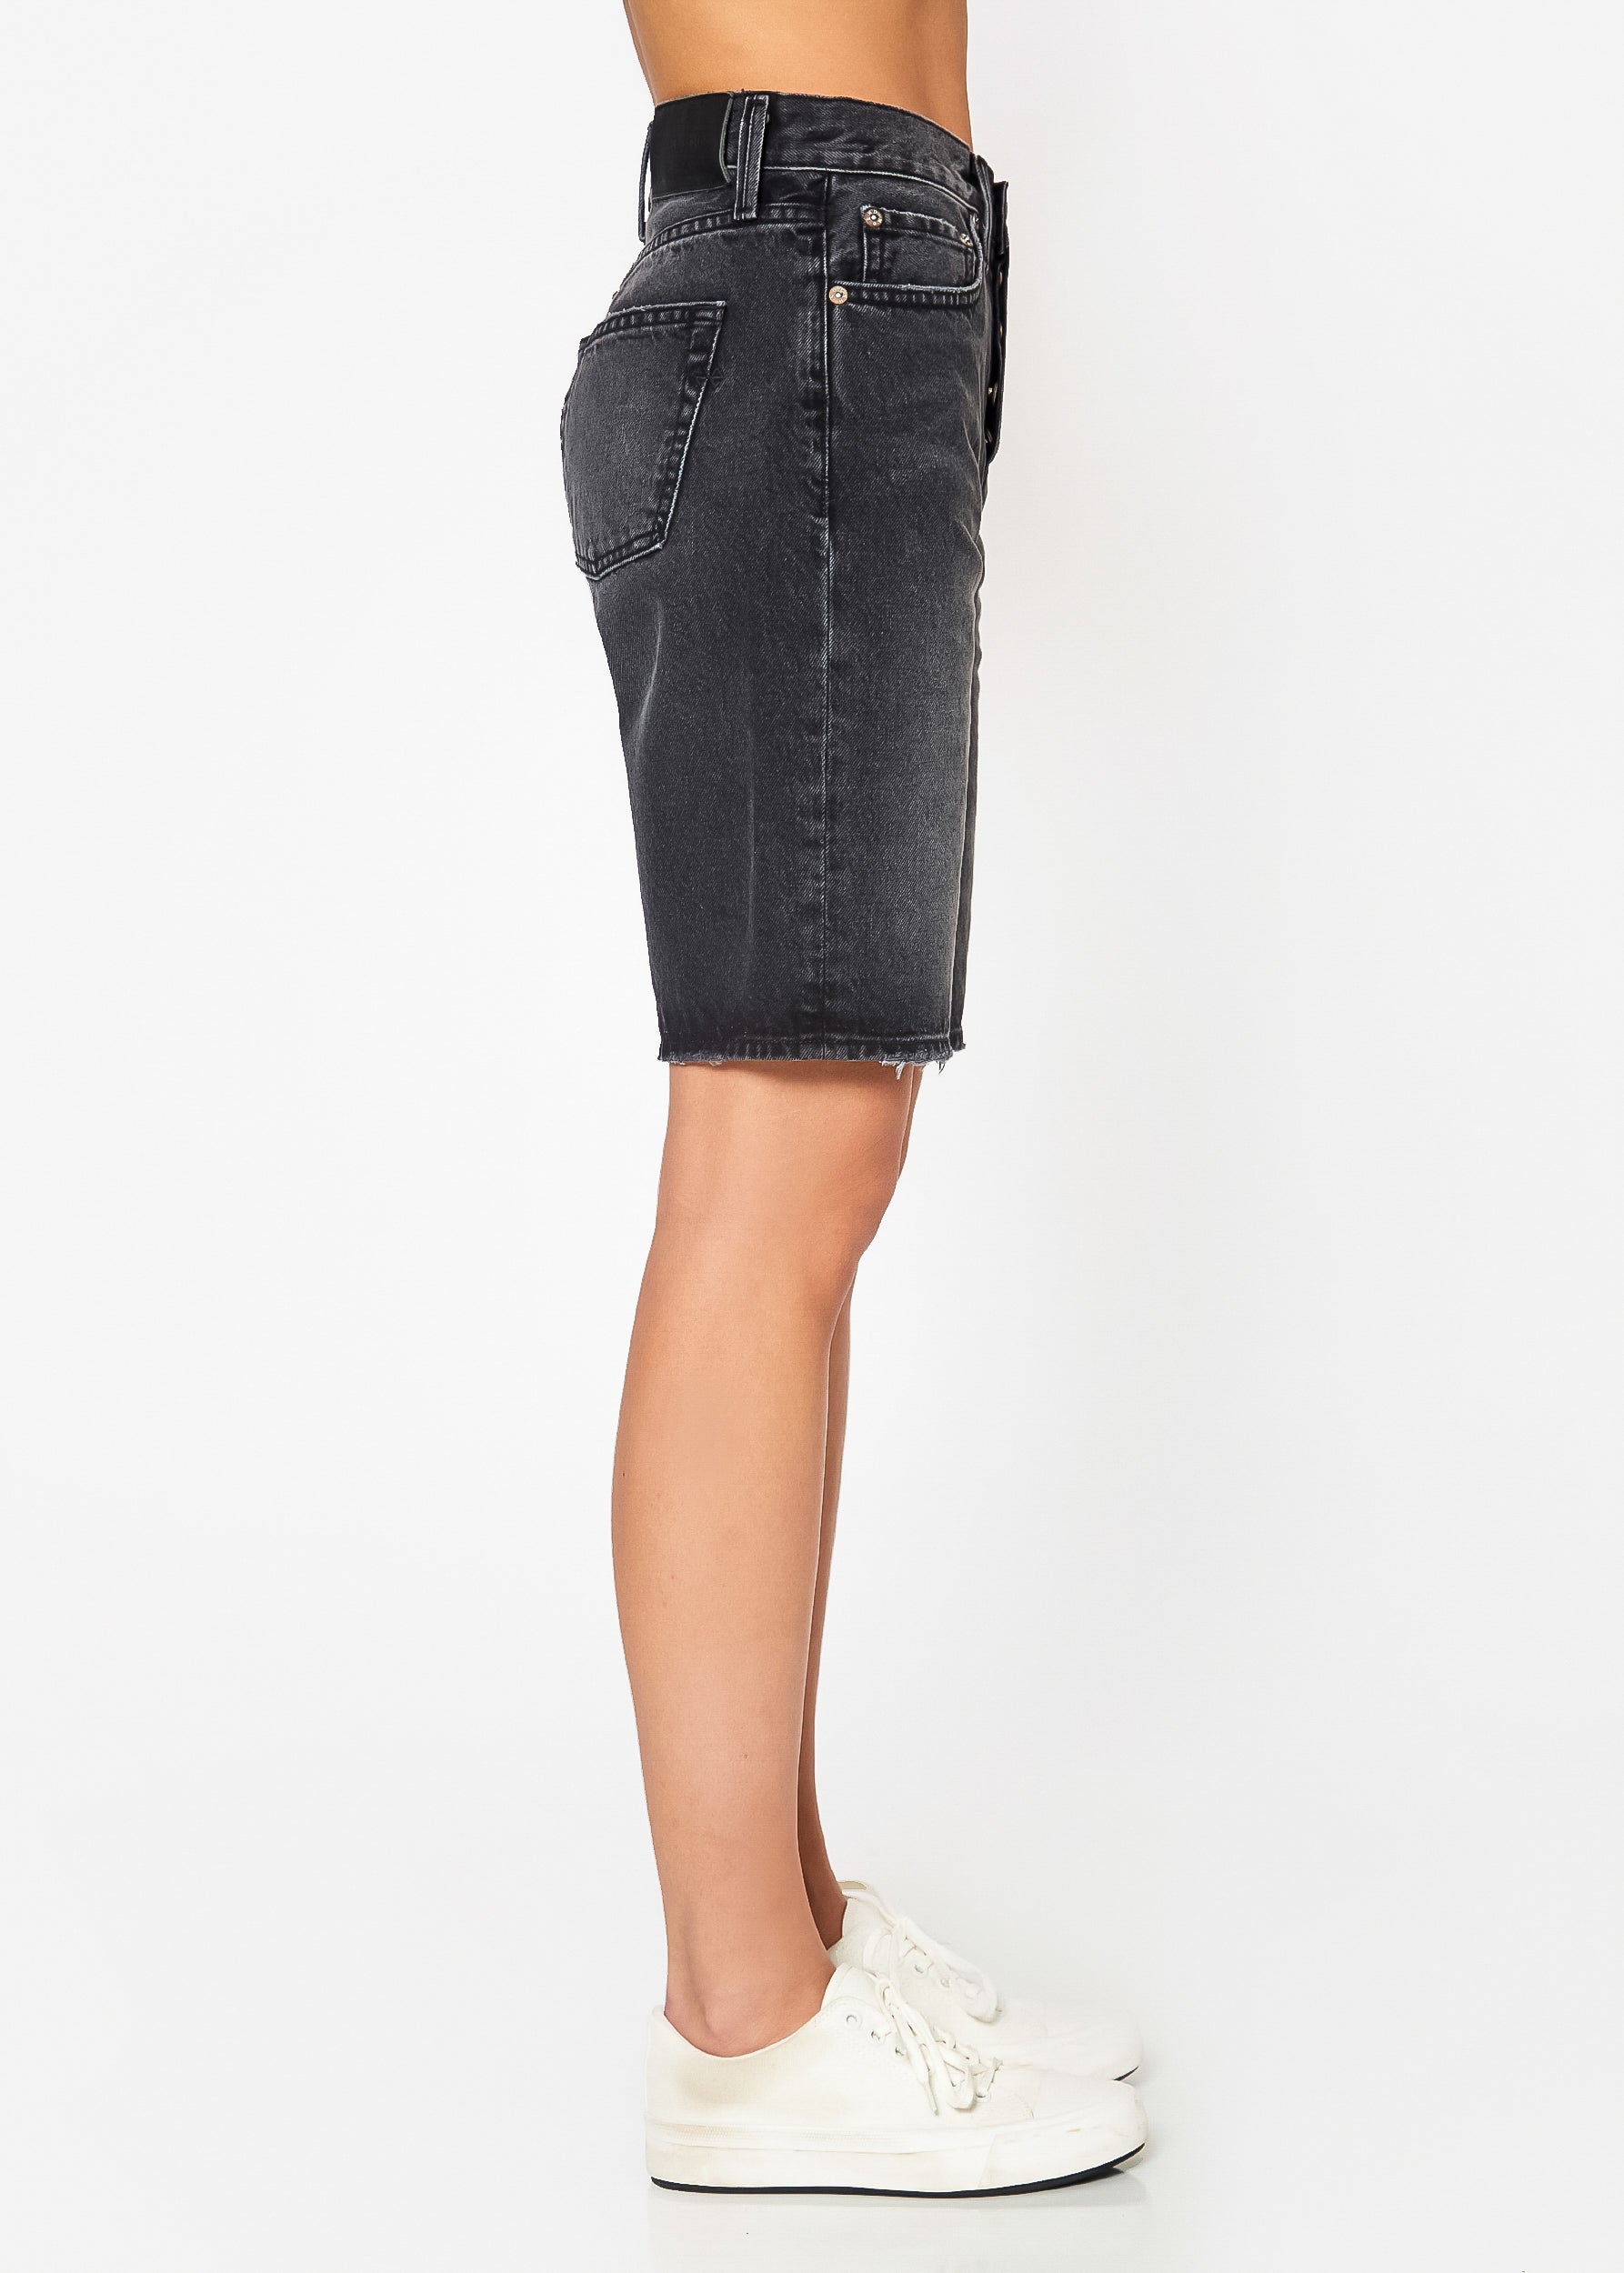 Muse Shorts In Mesquite - Noend Denim